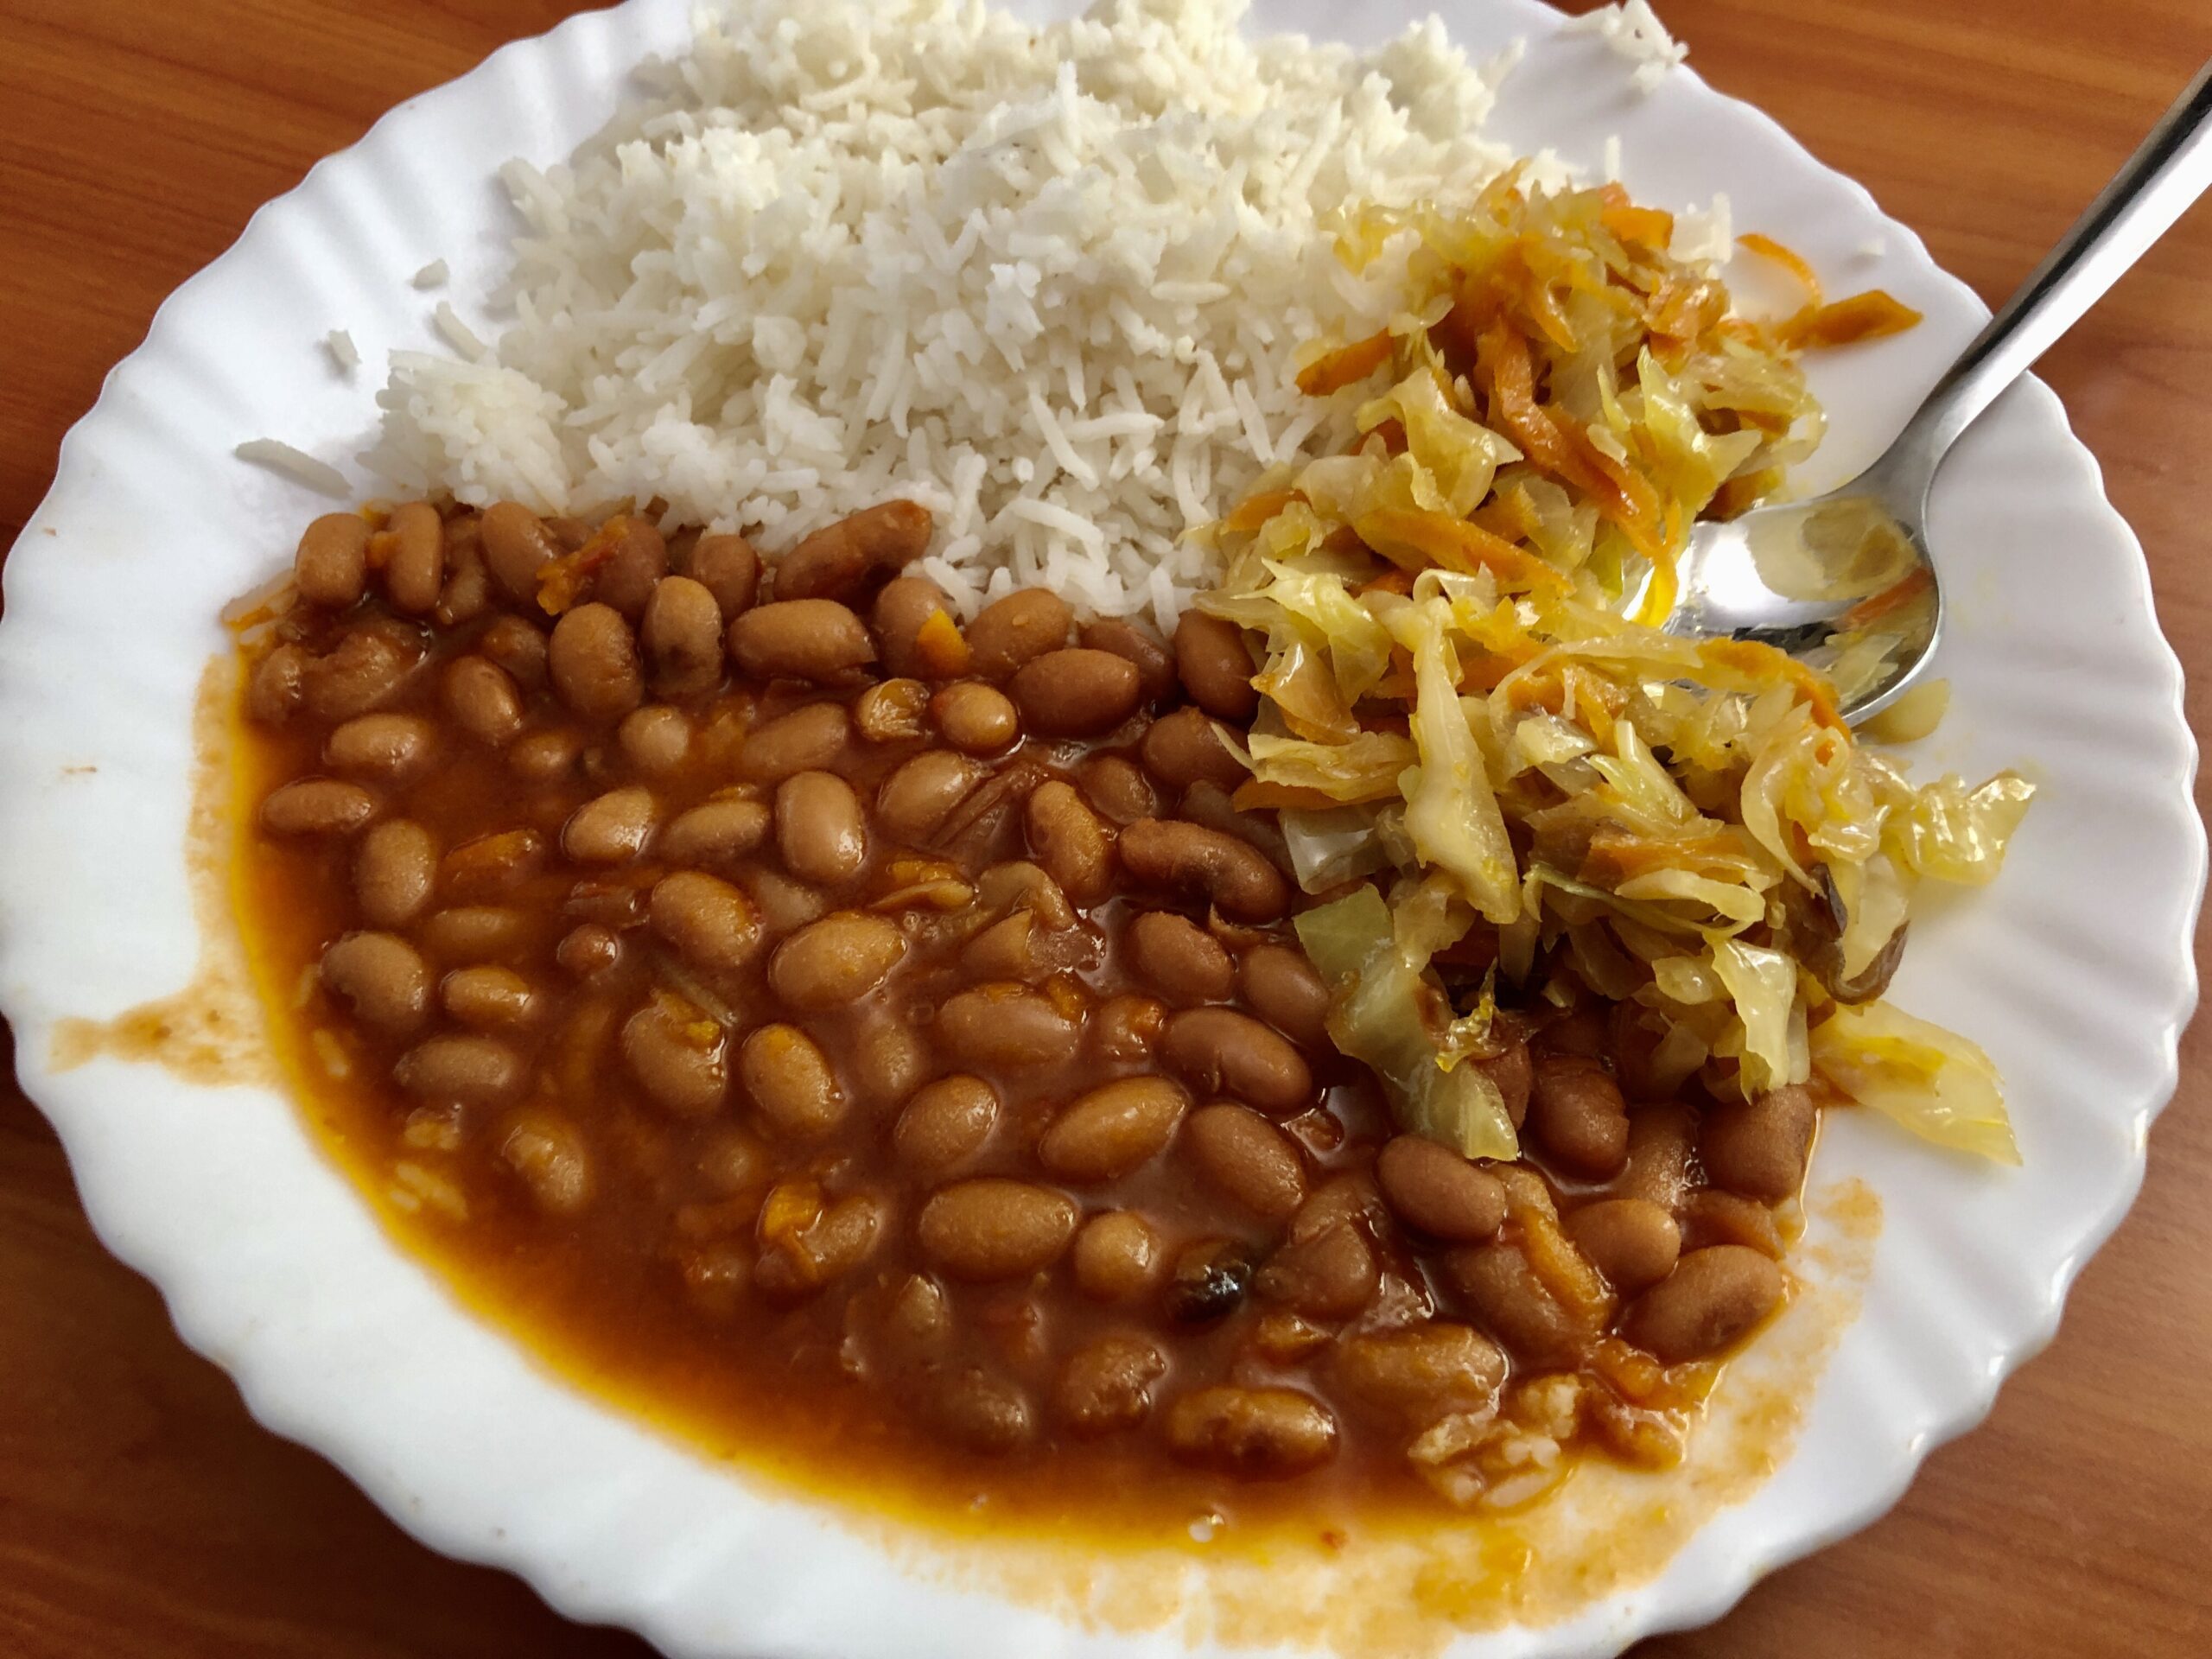 A plate of rice, beans and cabbage